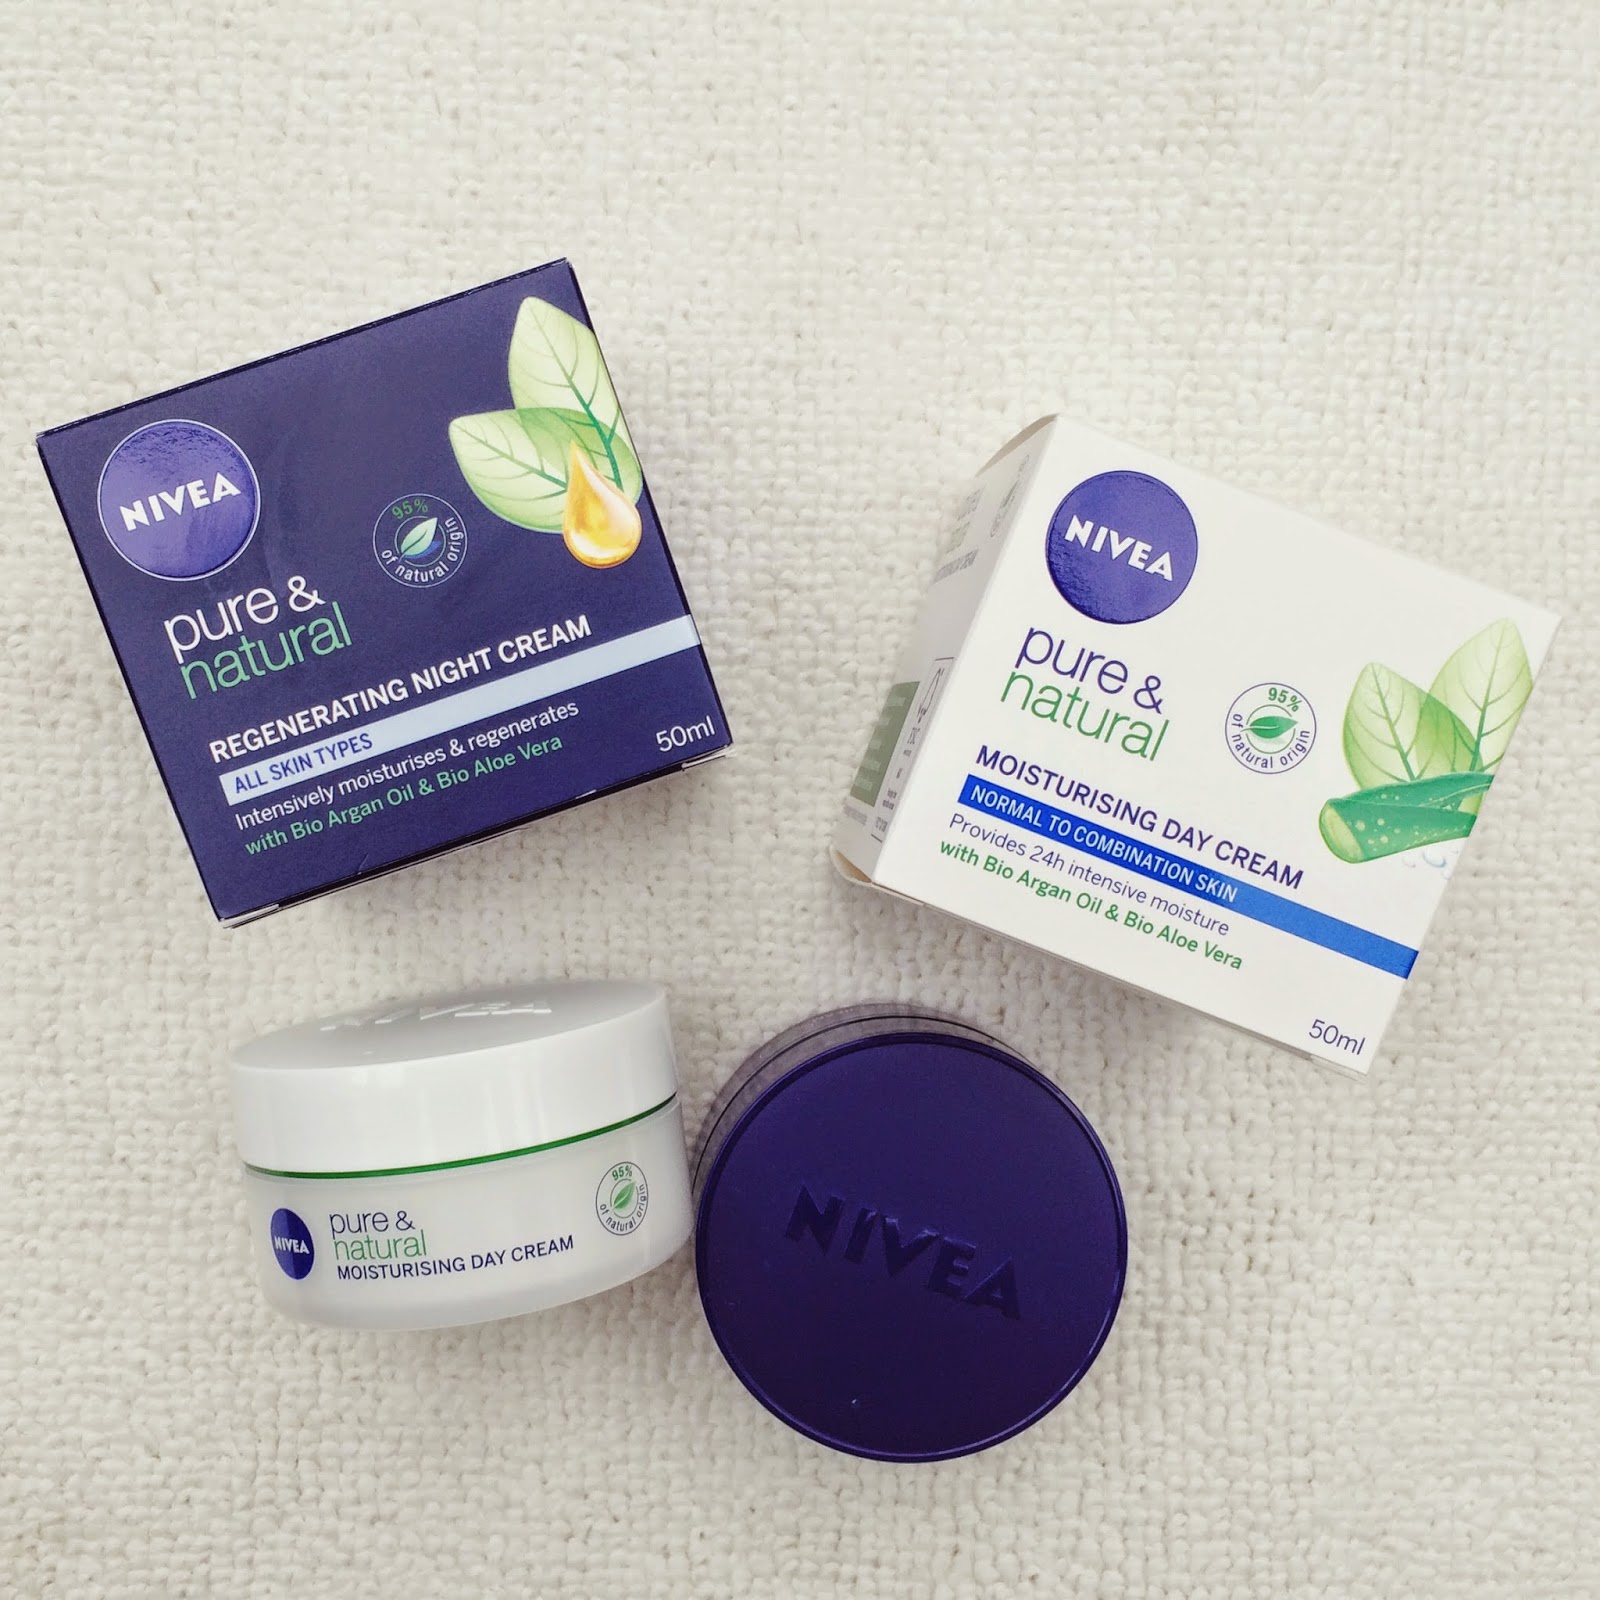 FashionFake, a UK fashion and lifestyle blog. Find out what I thought about these hughstreet facial creams in my review of the Nivea Pure & Natural Day and Night cream review.